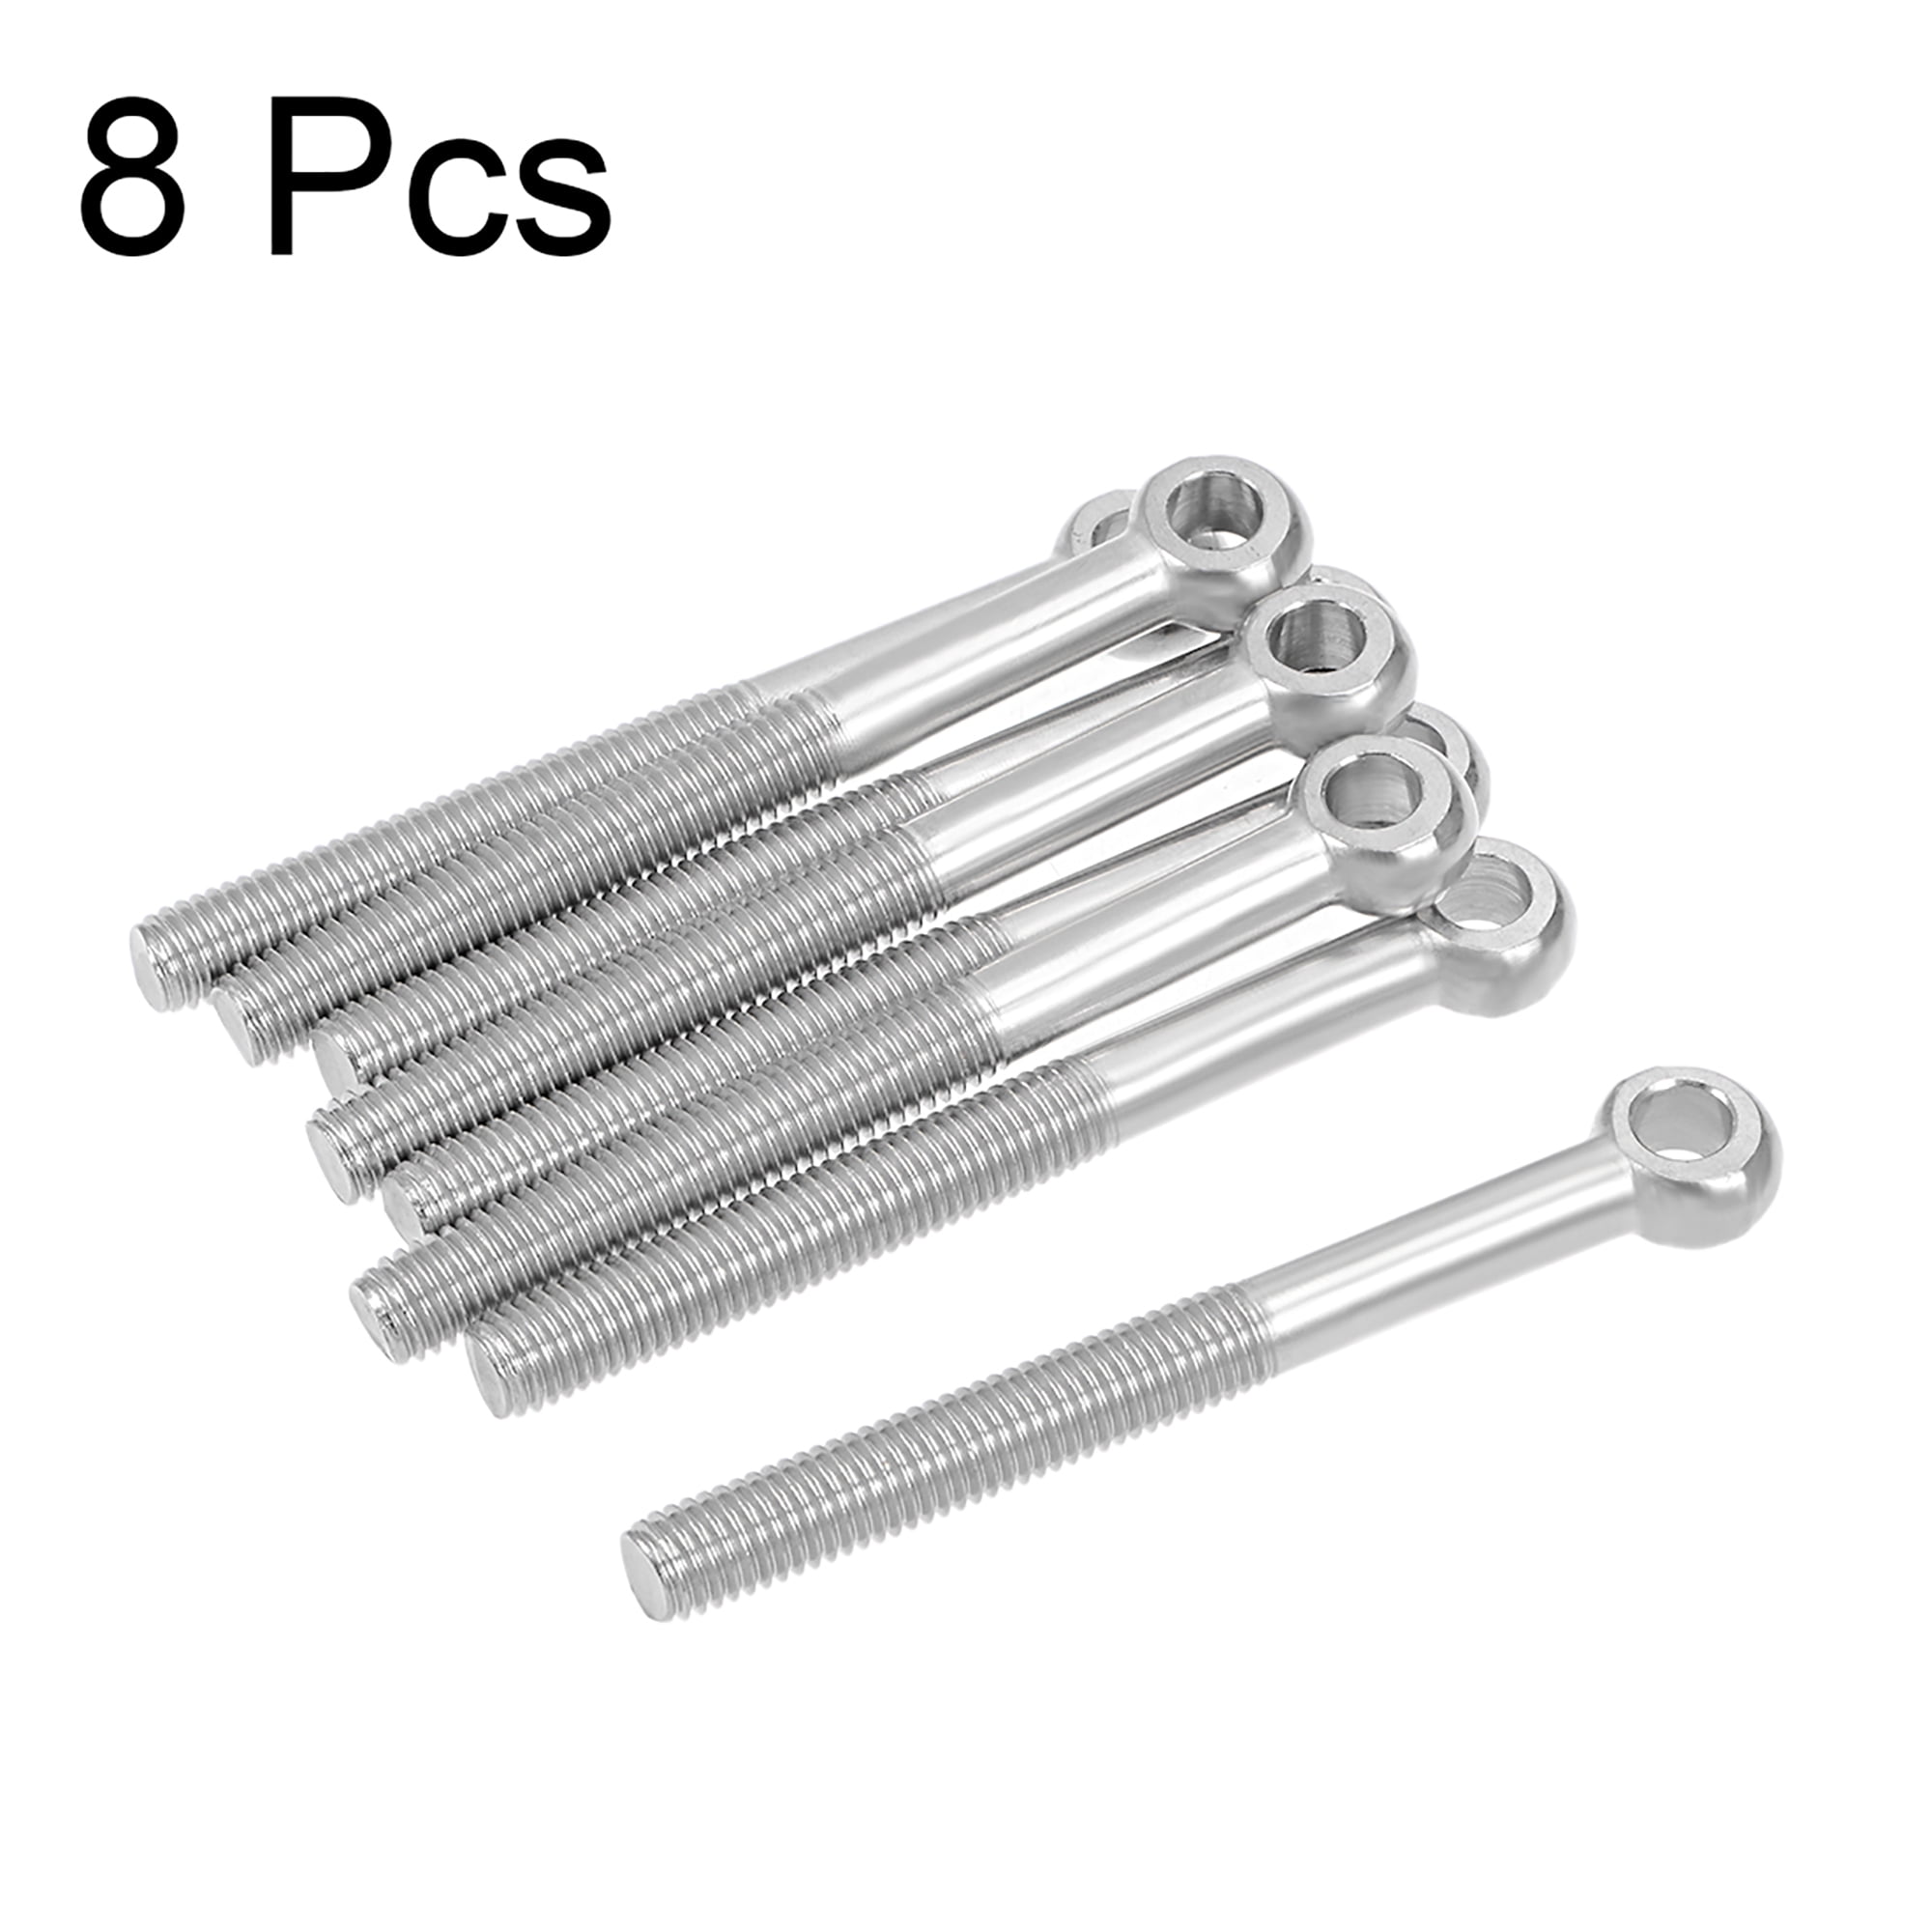 uxcell M10 x 100mm 304 Stainless Steel Machine Shoulder Lift Eye Bolt Rigging 5pcs a18070500ux0217